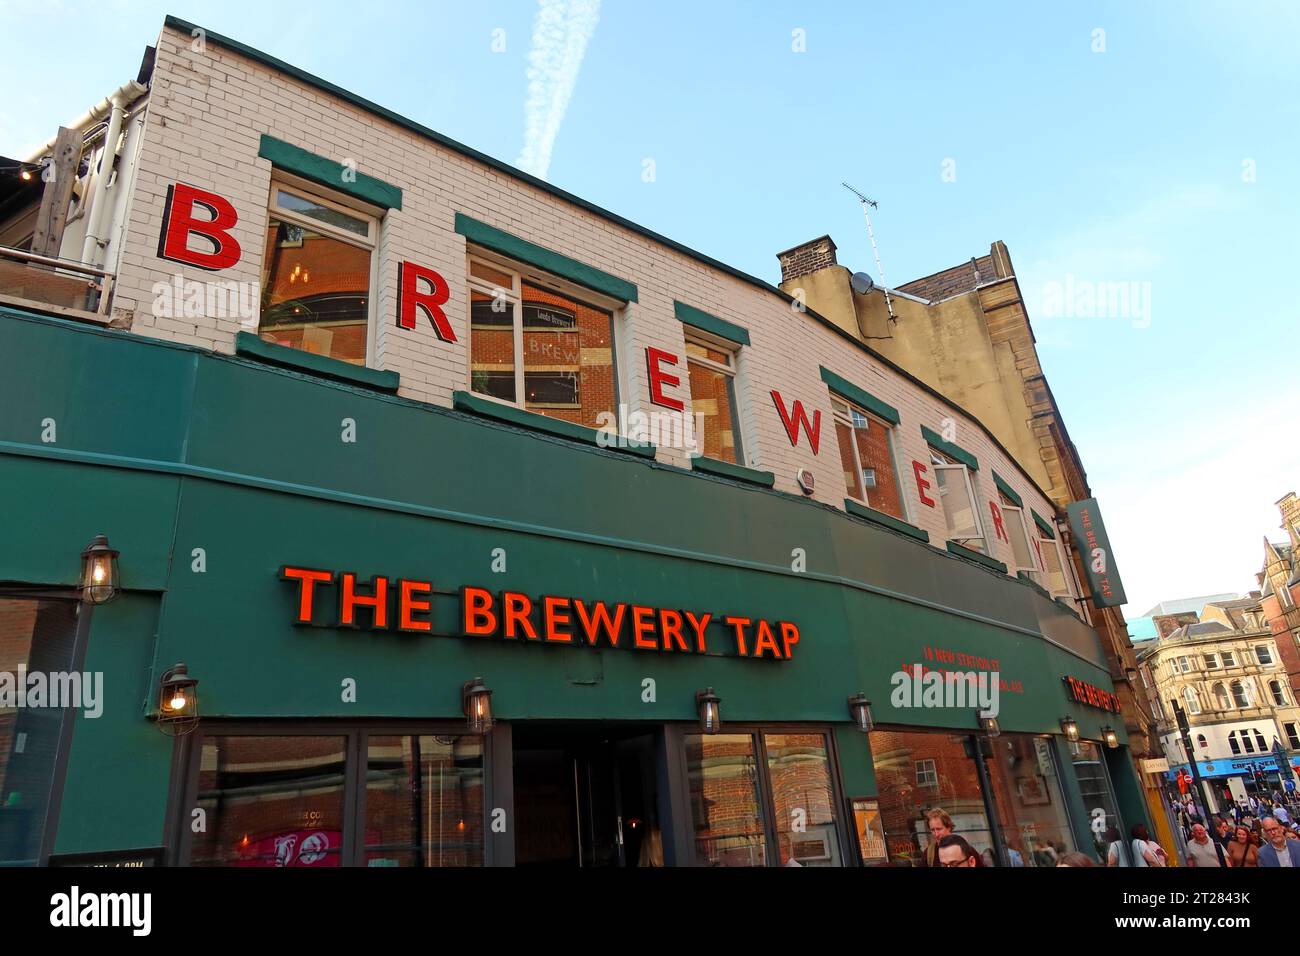 The Brewery Tap, Leeds, 18 New Station St, Leeds, Angleterre, Royaume-Uni, LS1 5DL Banque D'Images